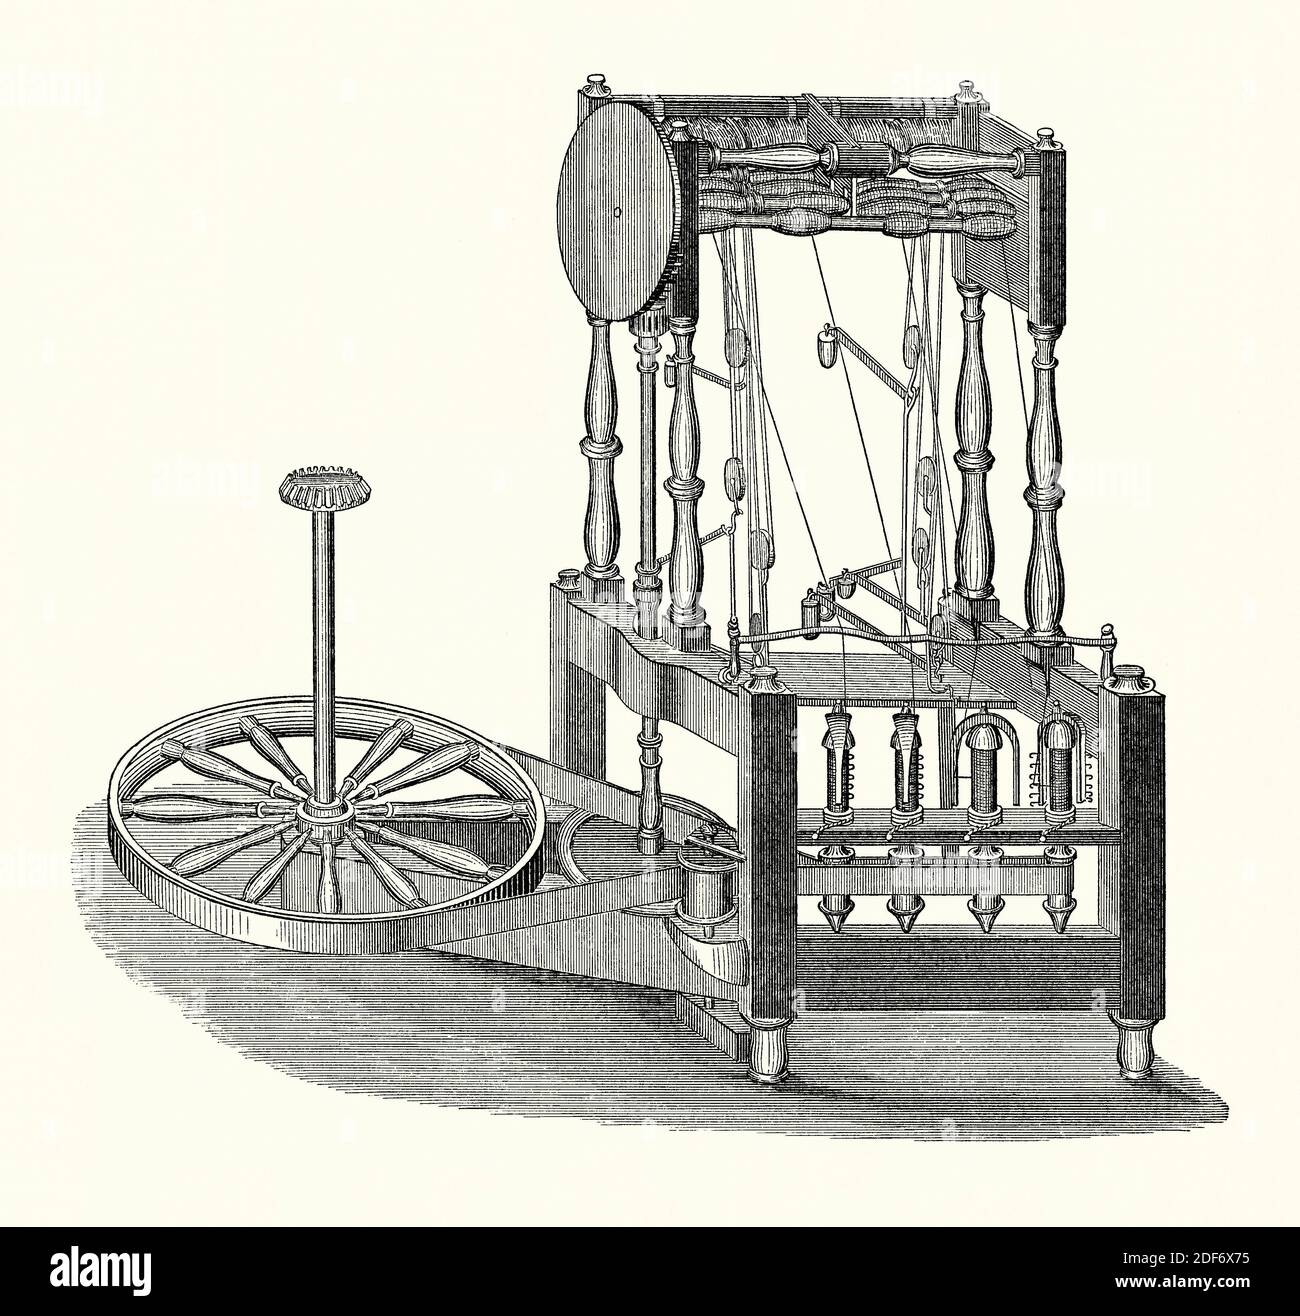 An old engraving of Arkwright’s water or spinning frame. It is from a Victorian mechanical engineering book of the 1880s. The water frame is a spinning frame that is powered by a water-wheel. Richard Arkwright (1732–1792), who patented it in 1769, designed the machine for making cotton thread. It was first used in 1765 and was able to spin 96 threads at a time, far faster than ever before. In 1770 Arkwright and partners built a water-powered mill in Cromford, Derbyshire, England, UK. It soon employed over 300 people and is often regarded as the first factory of the Industrial Revolution. Stock Photo